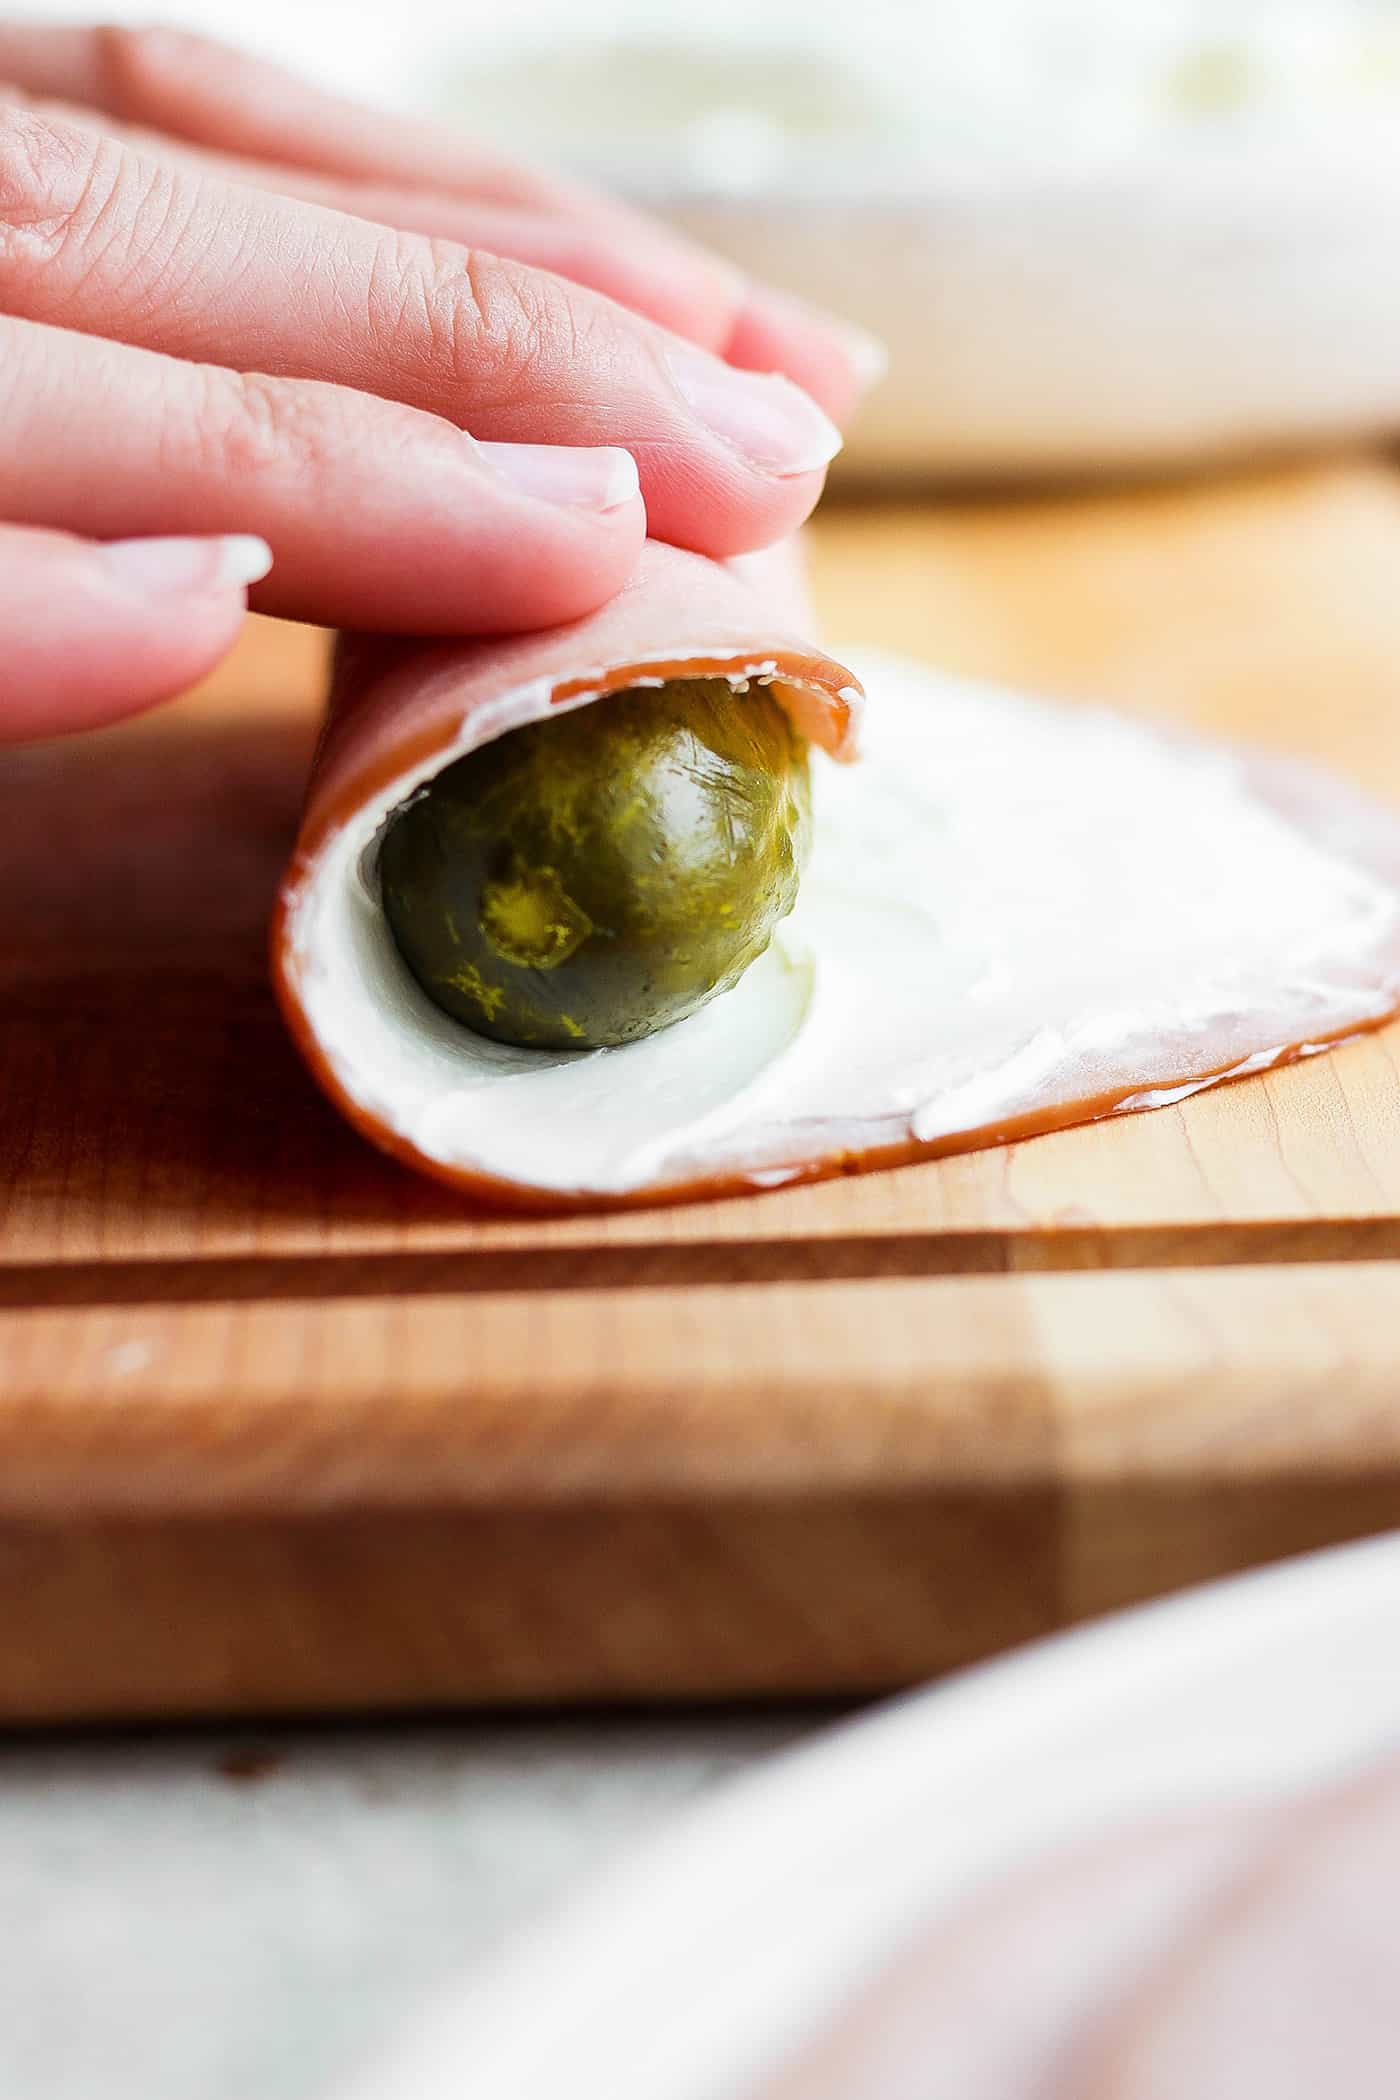 Hands roll a pickle in a piece of ham spread with cream cheese.